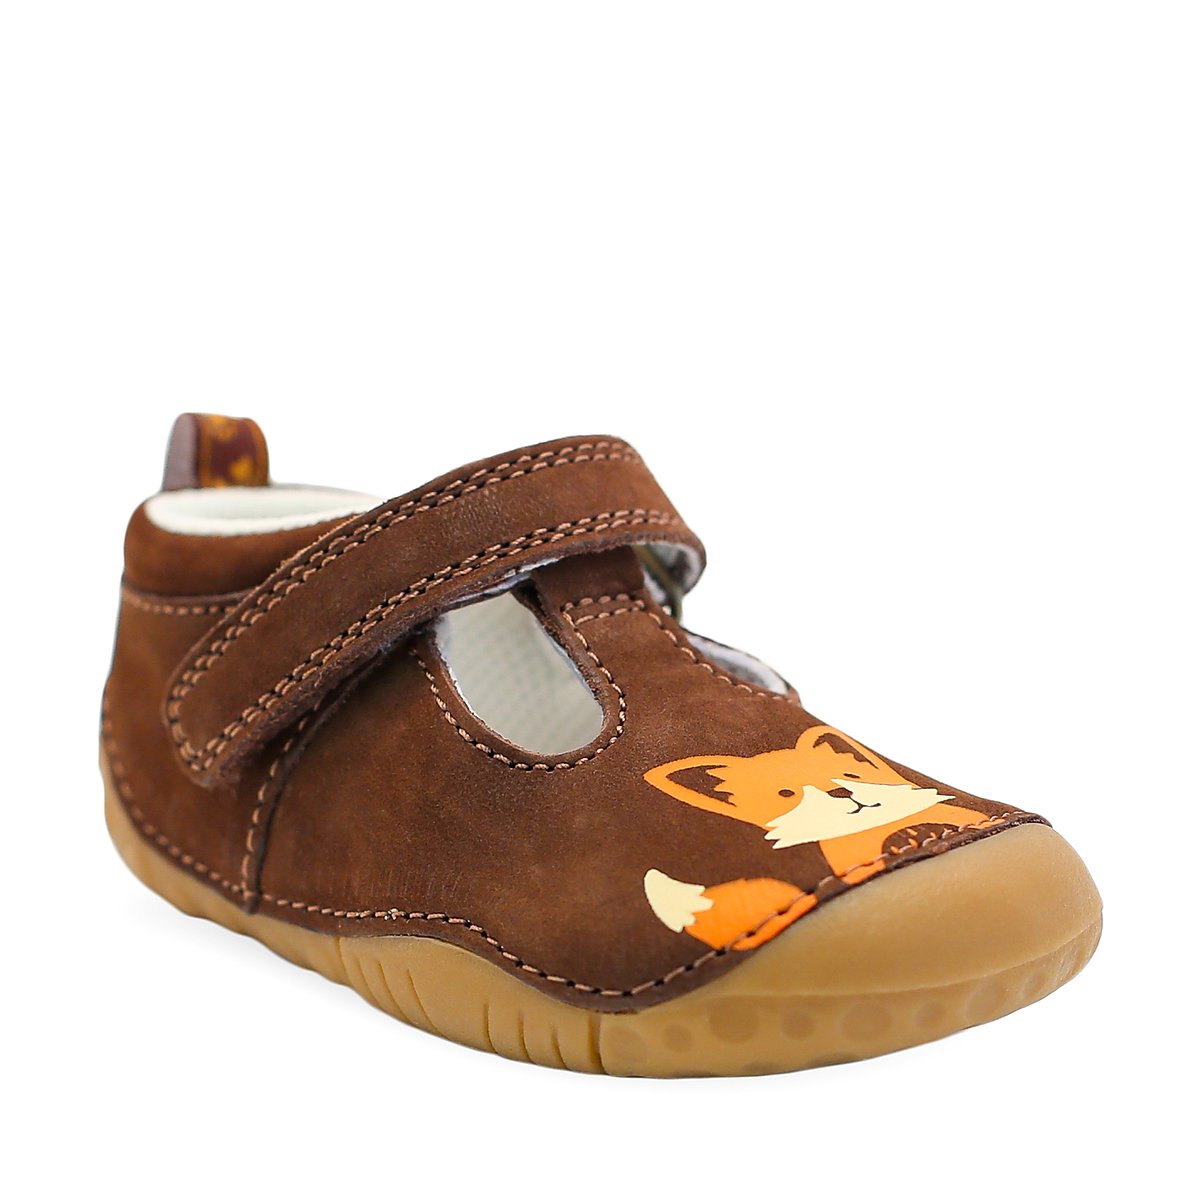 Little Pal in Brown Nubuck with Fox motif from the Start-Rite Shoes and JoJo Maman Bébé Collection